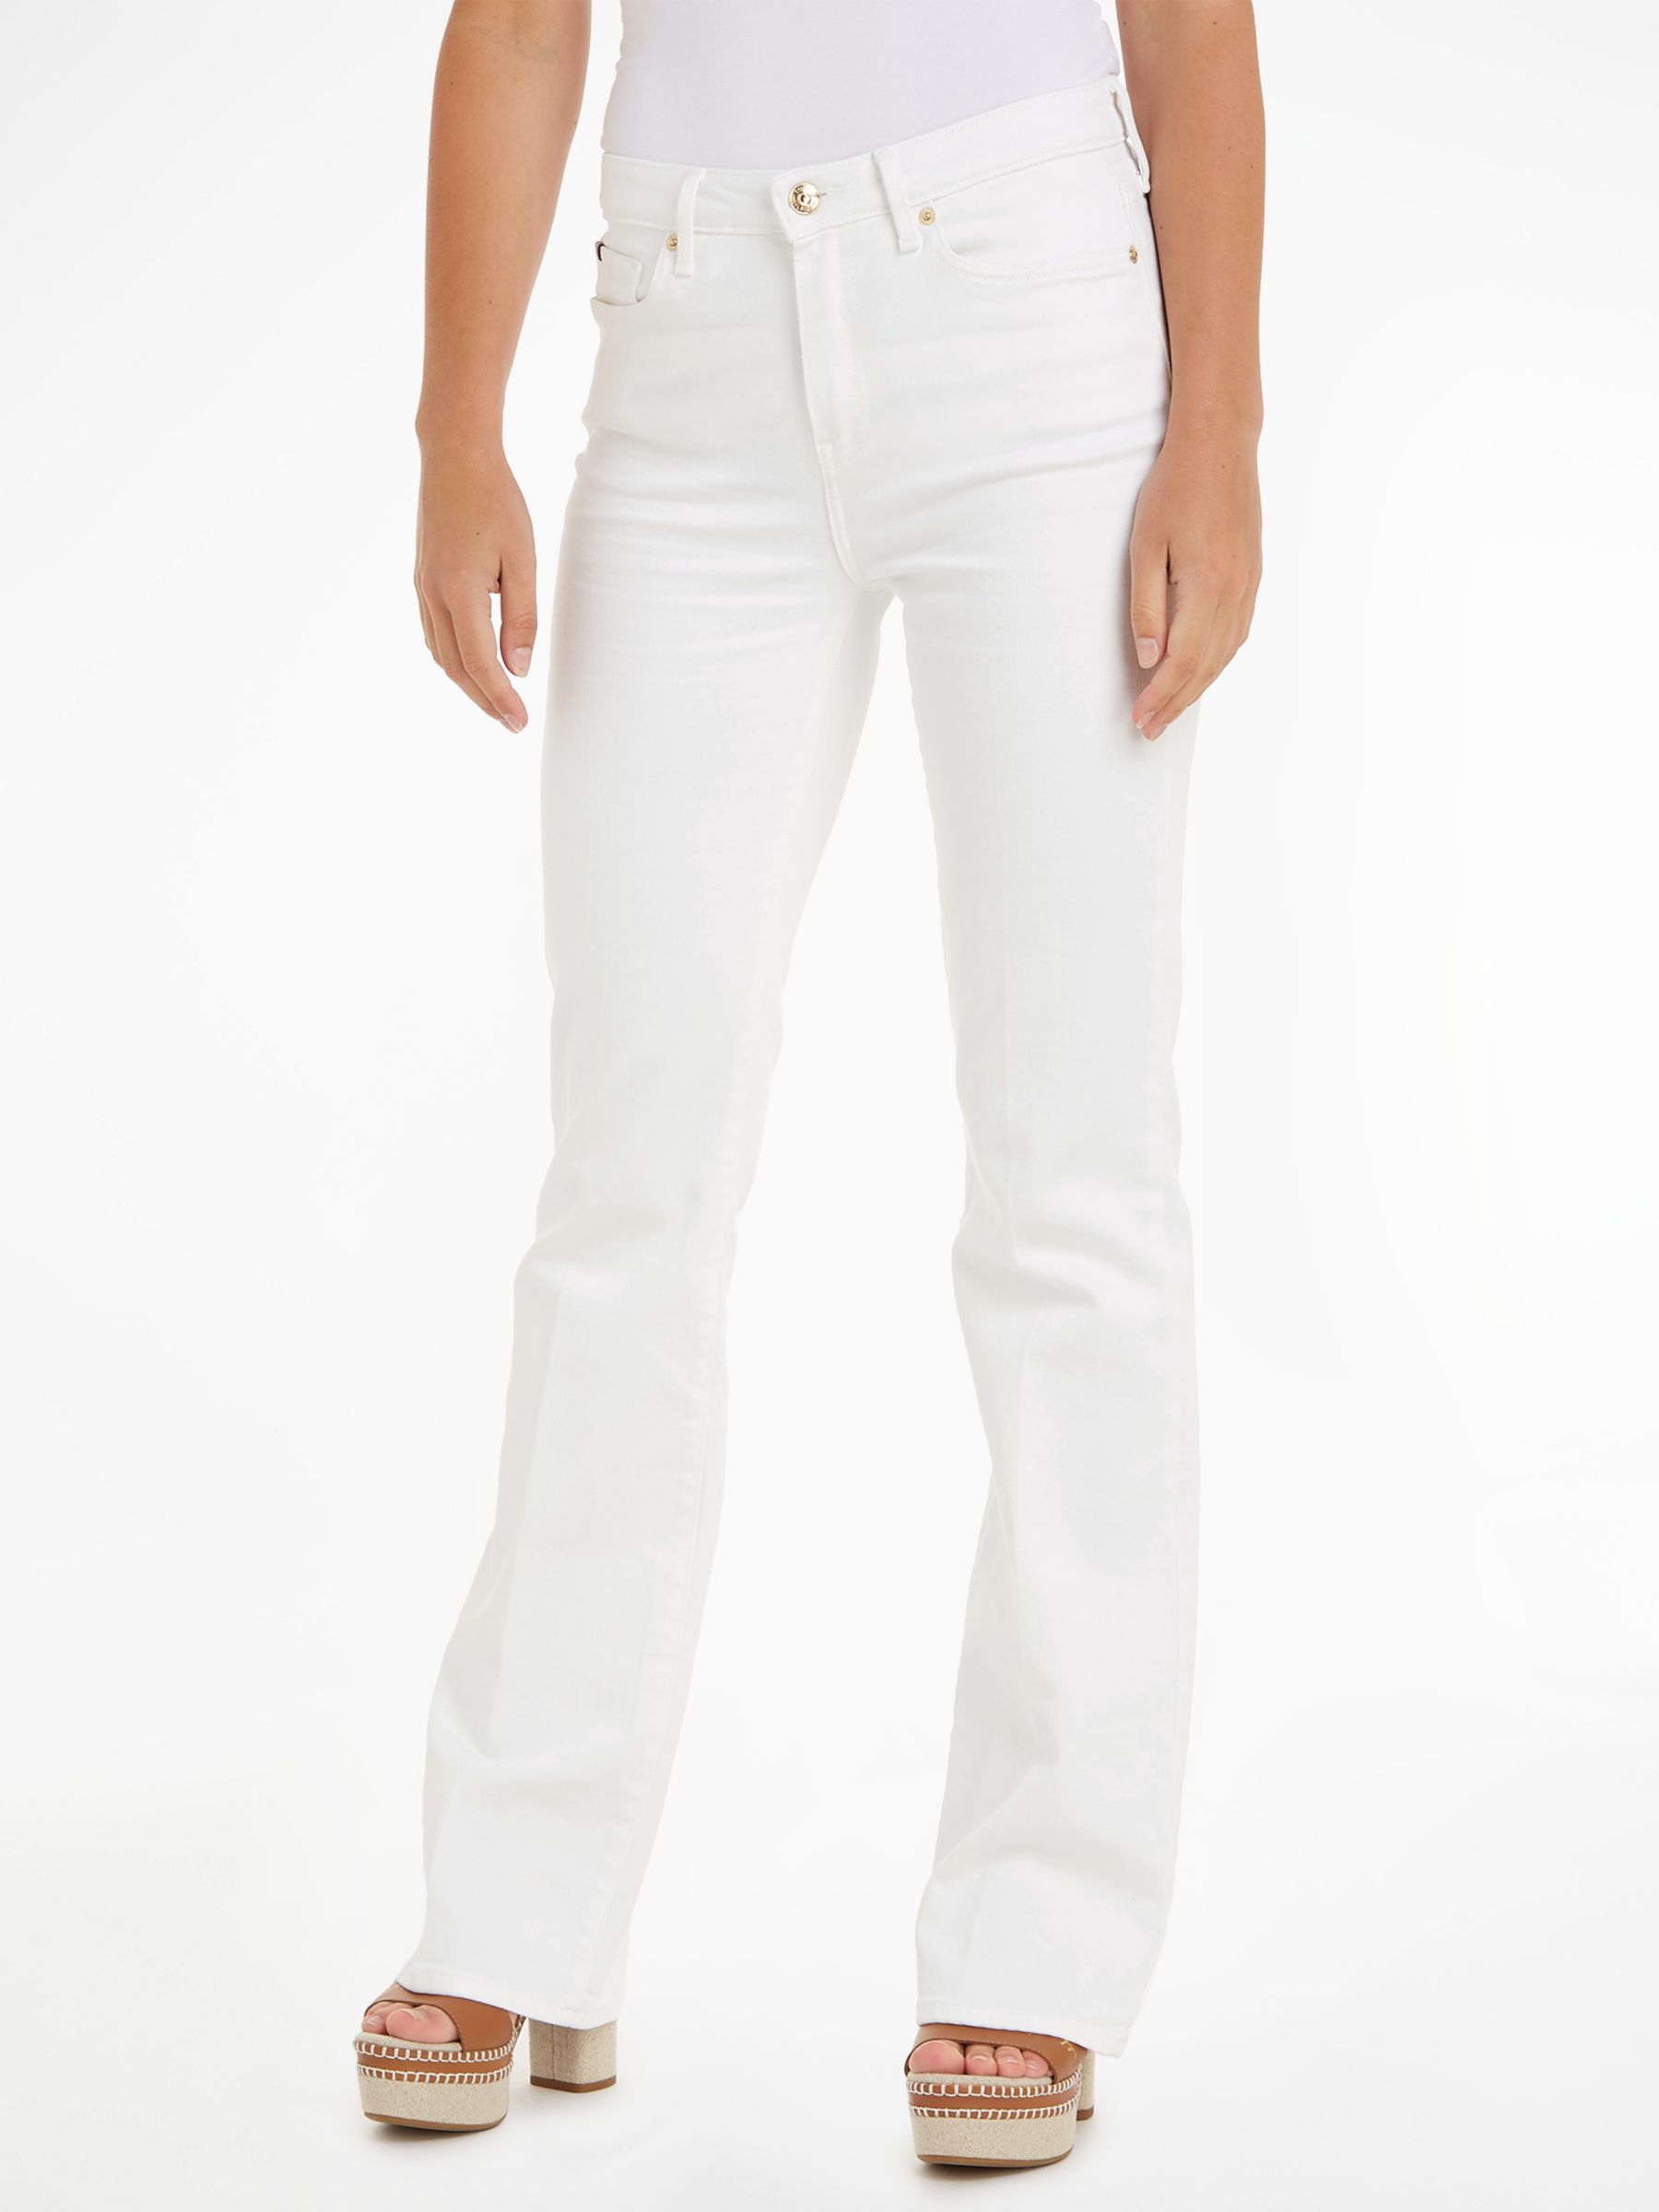 Tommy Hilfiger Bootcut Jeans, White, 25R